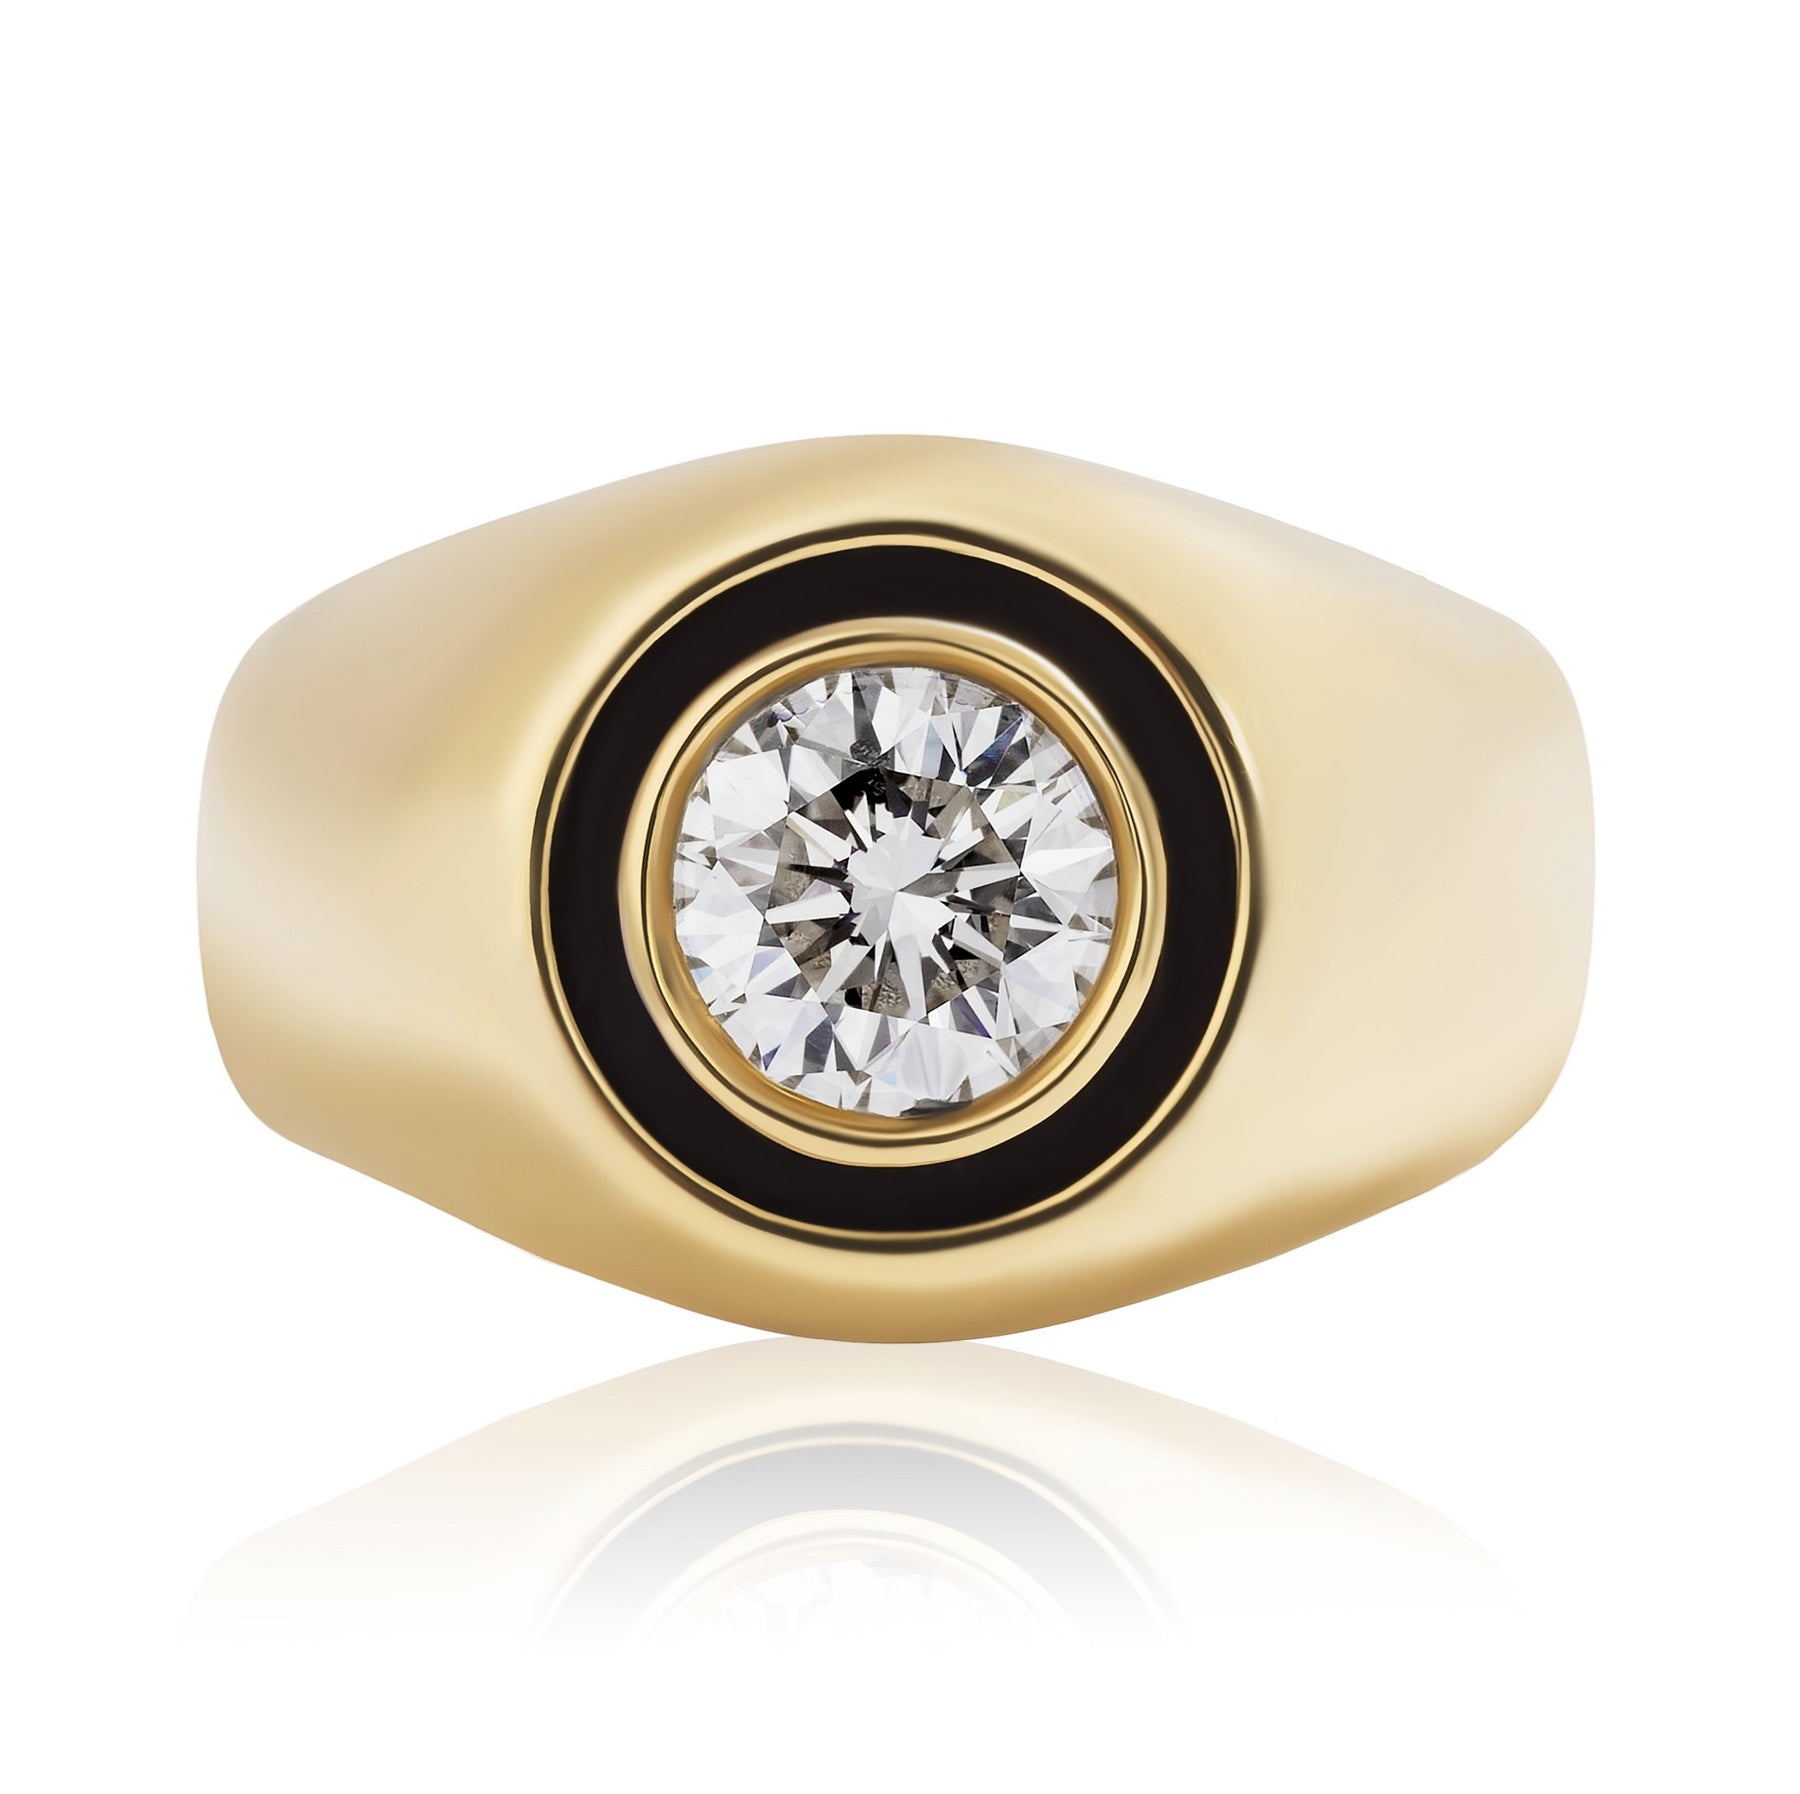 Enamel Signet Ring in Yellow Gold with Round Brilliant Diamond